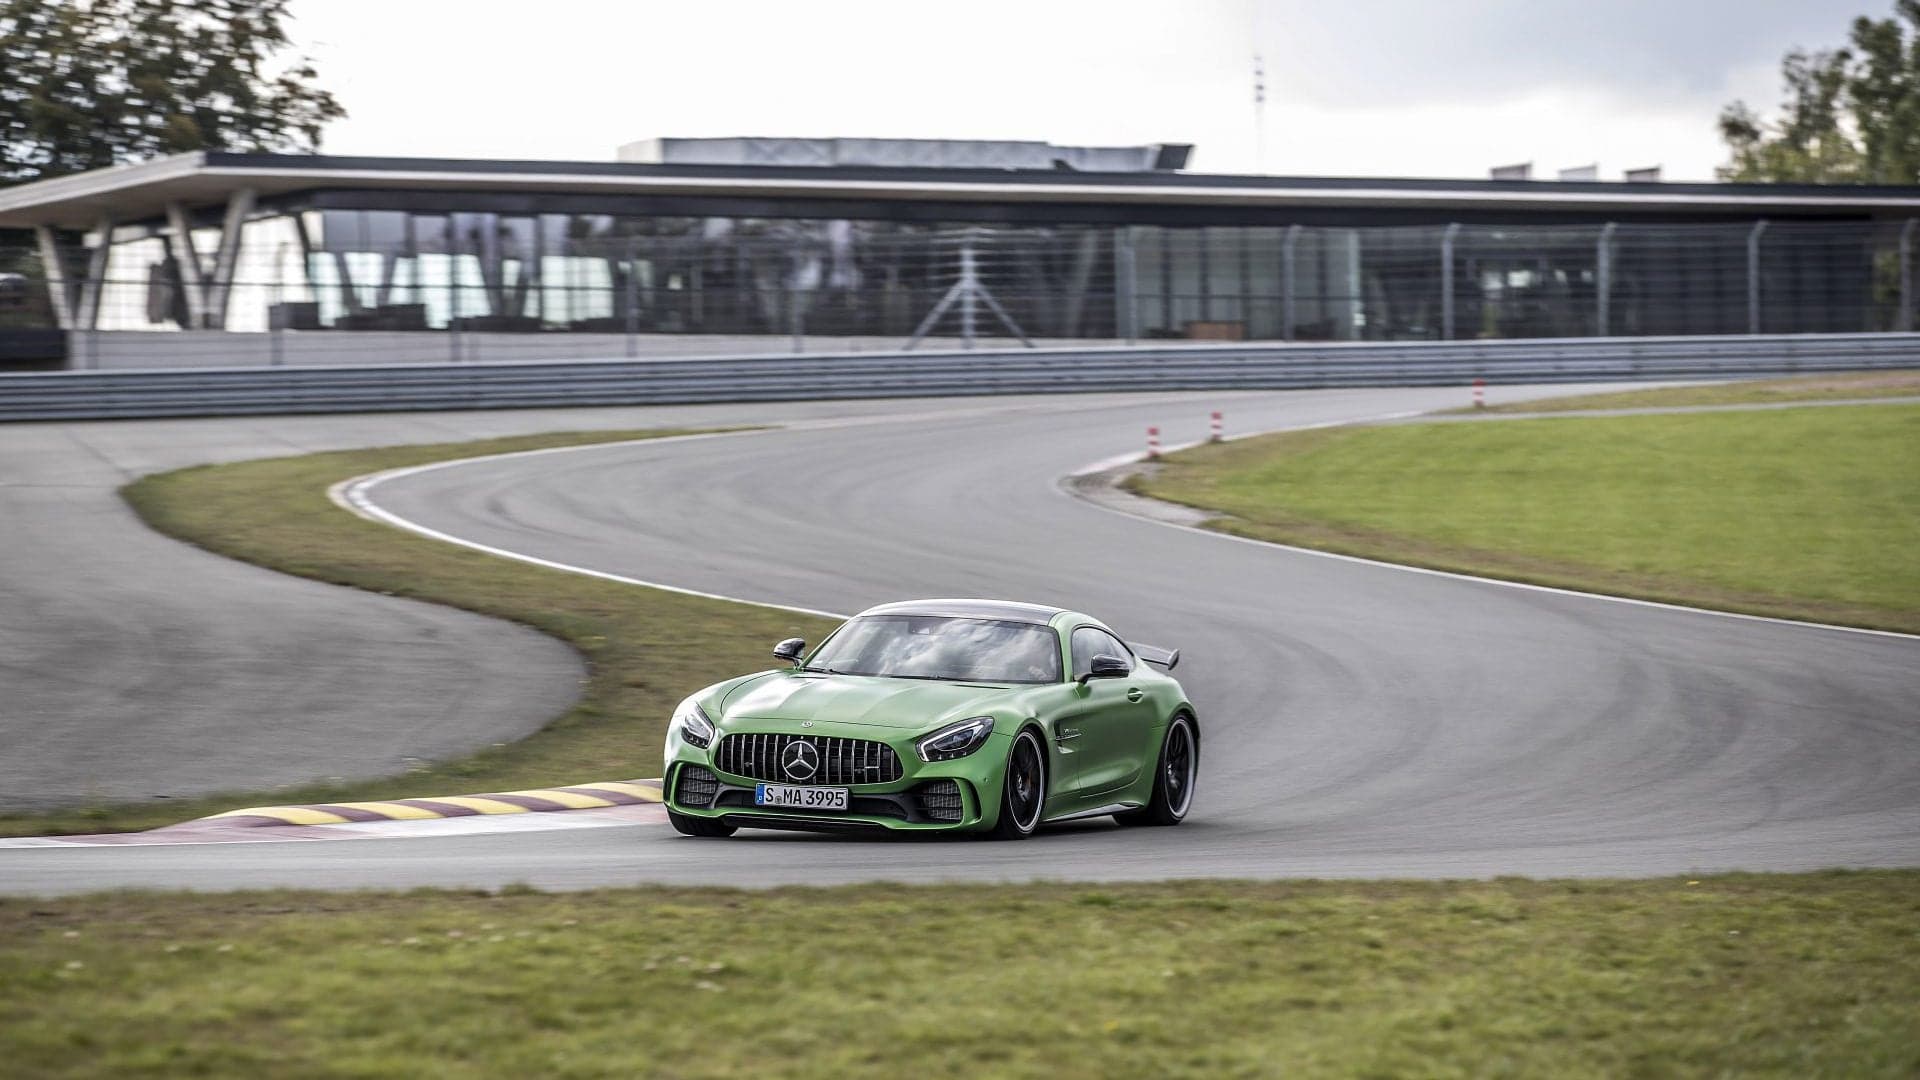 Mercedes-AMG GT Black Series is Coming in 2020: Report